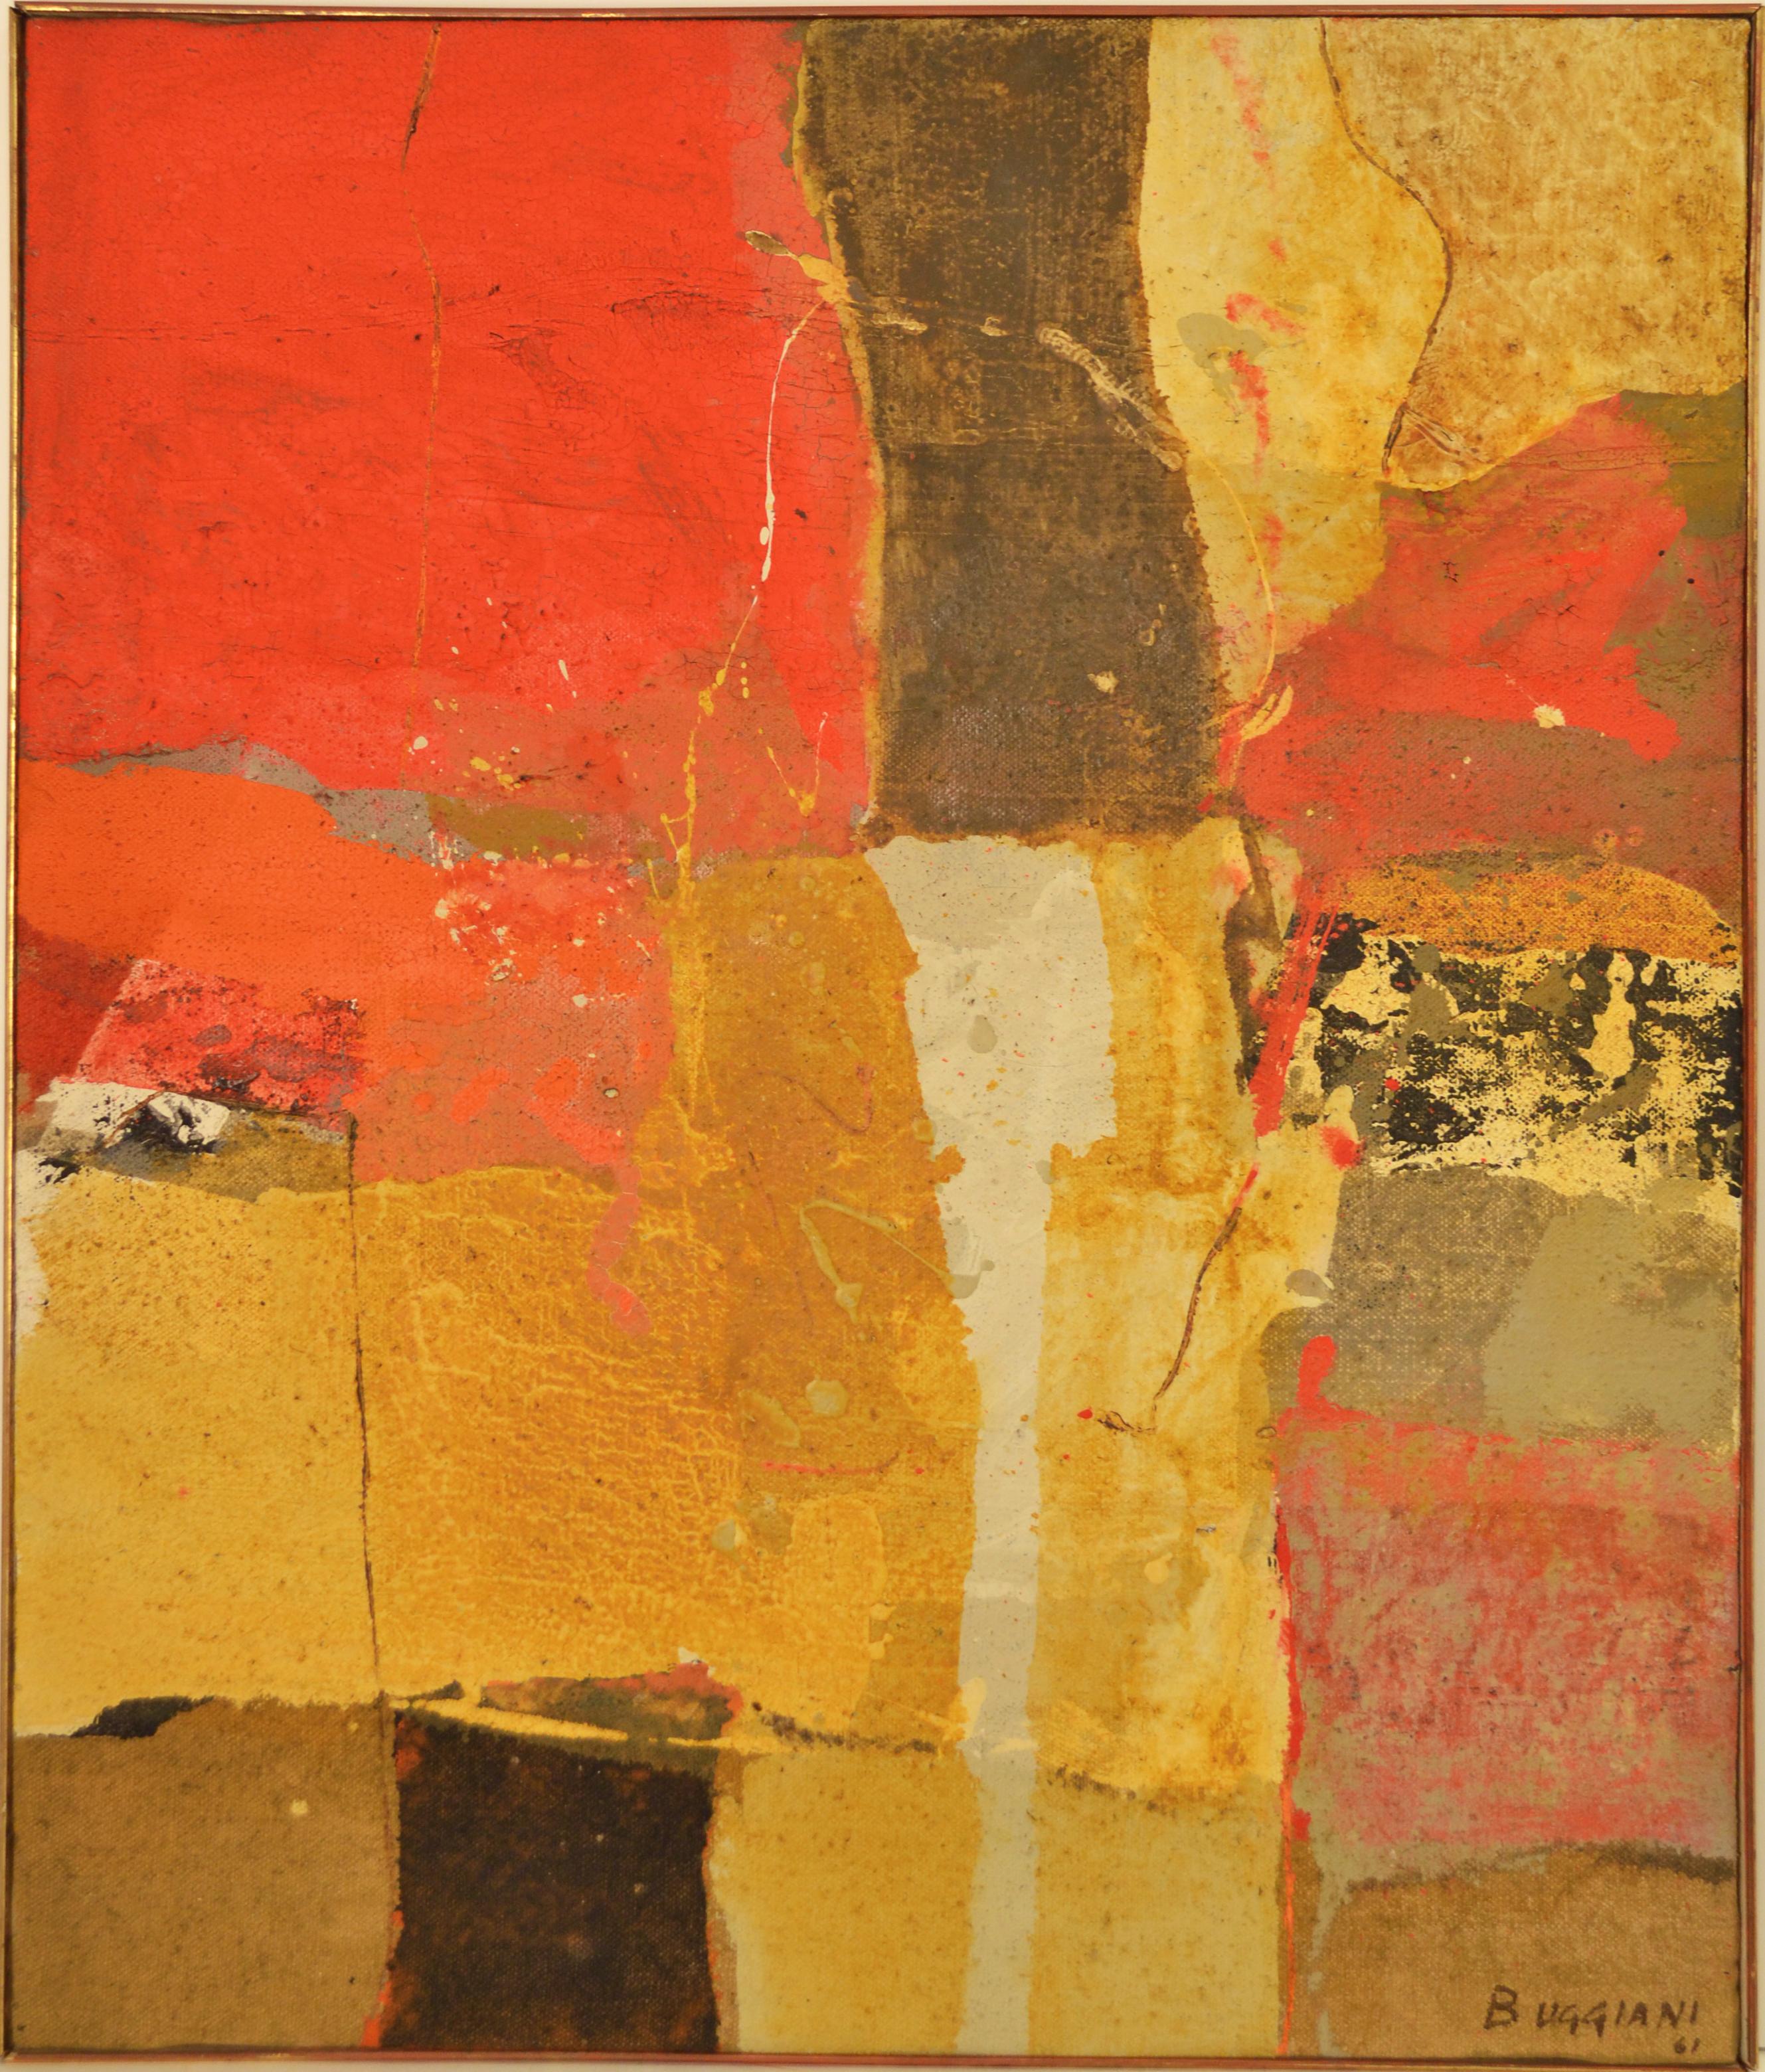  "Muro al Sole, 1961" Oil on Canvas 29 x 24 - Painting by Paolo Buggiani